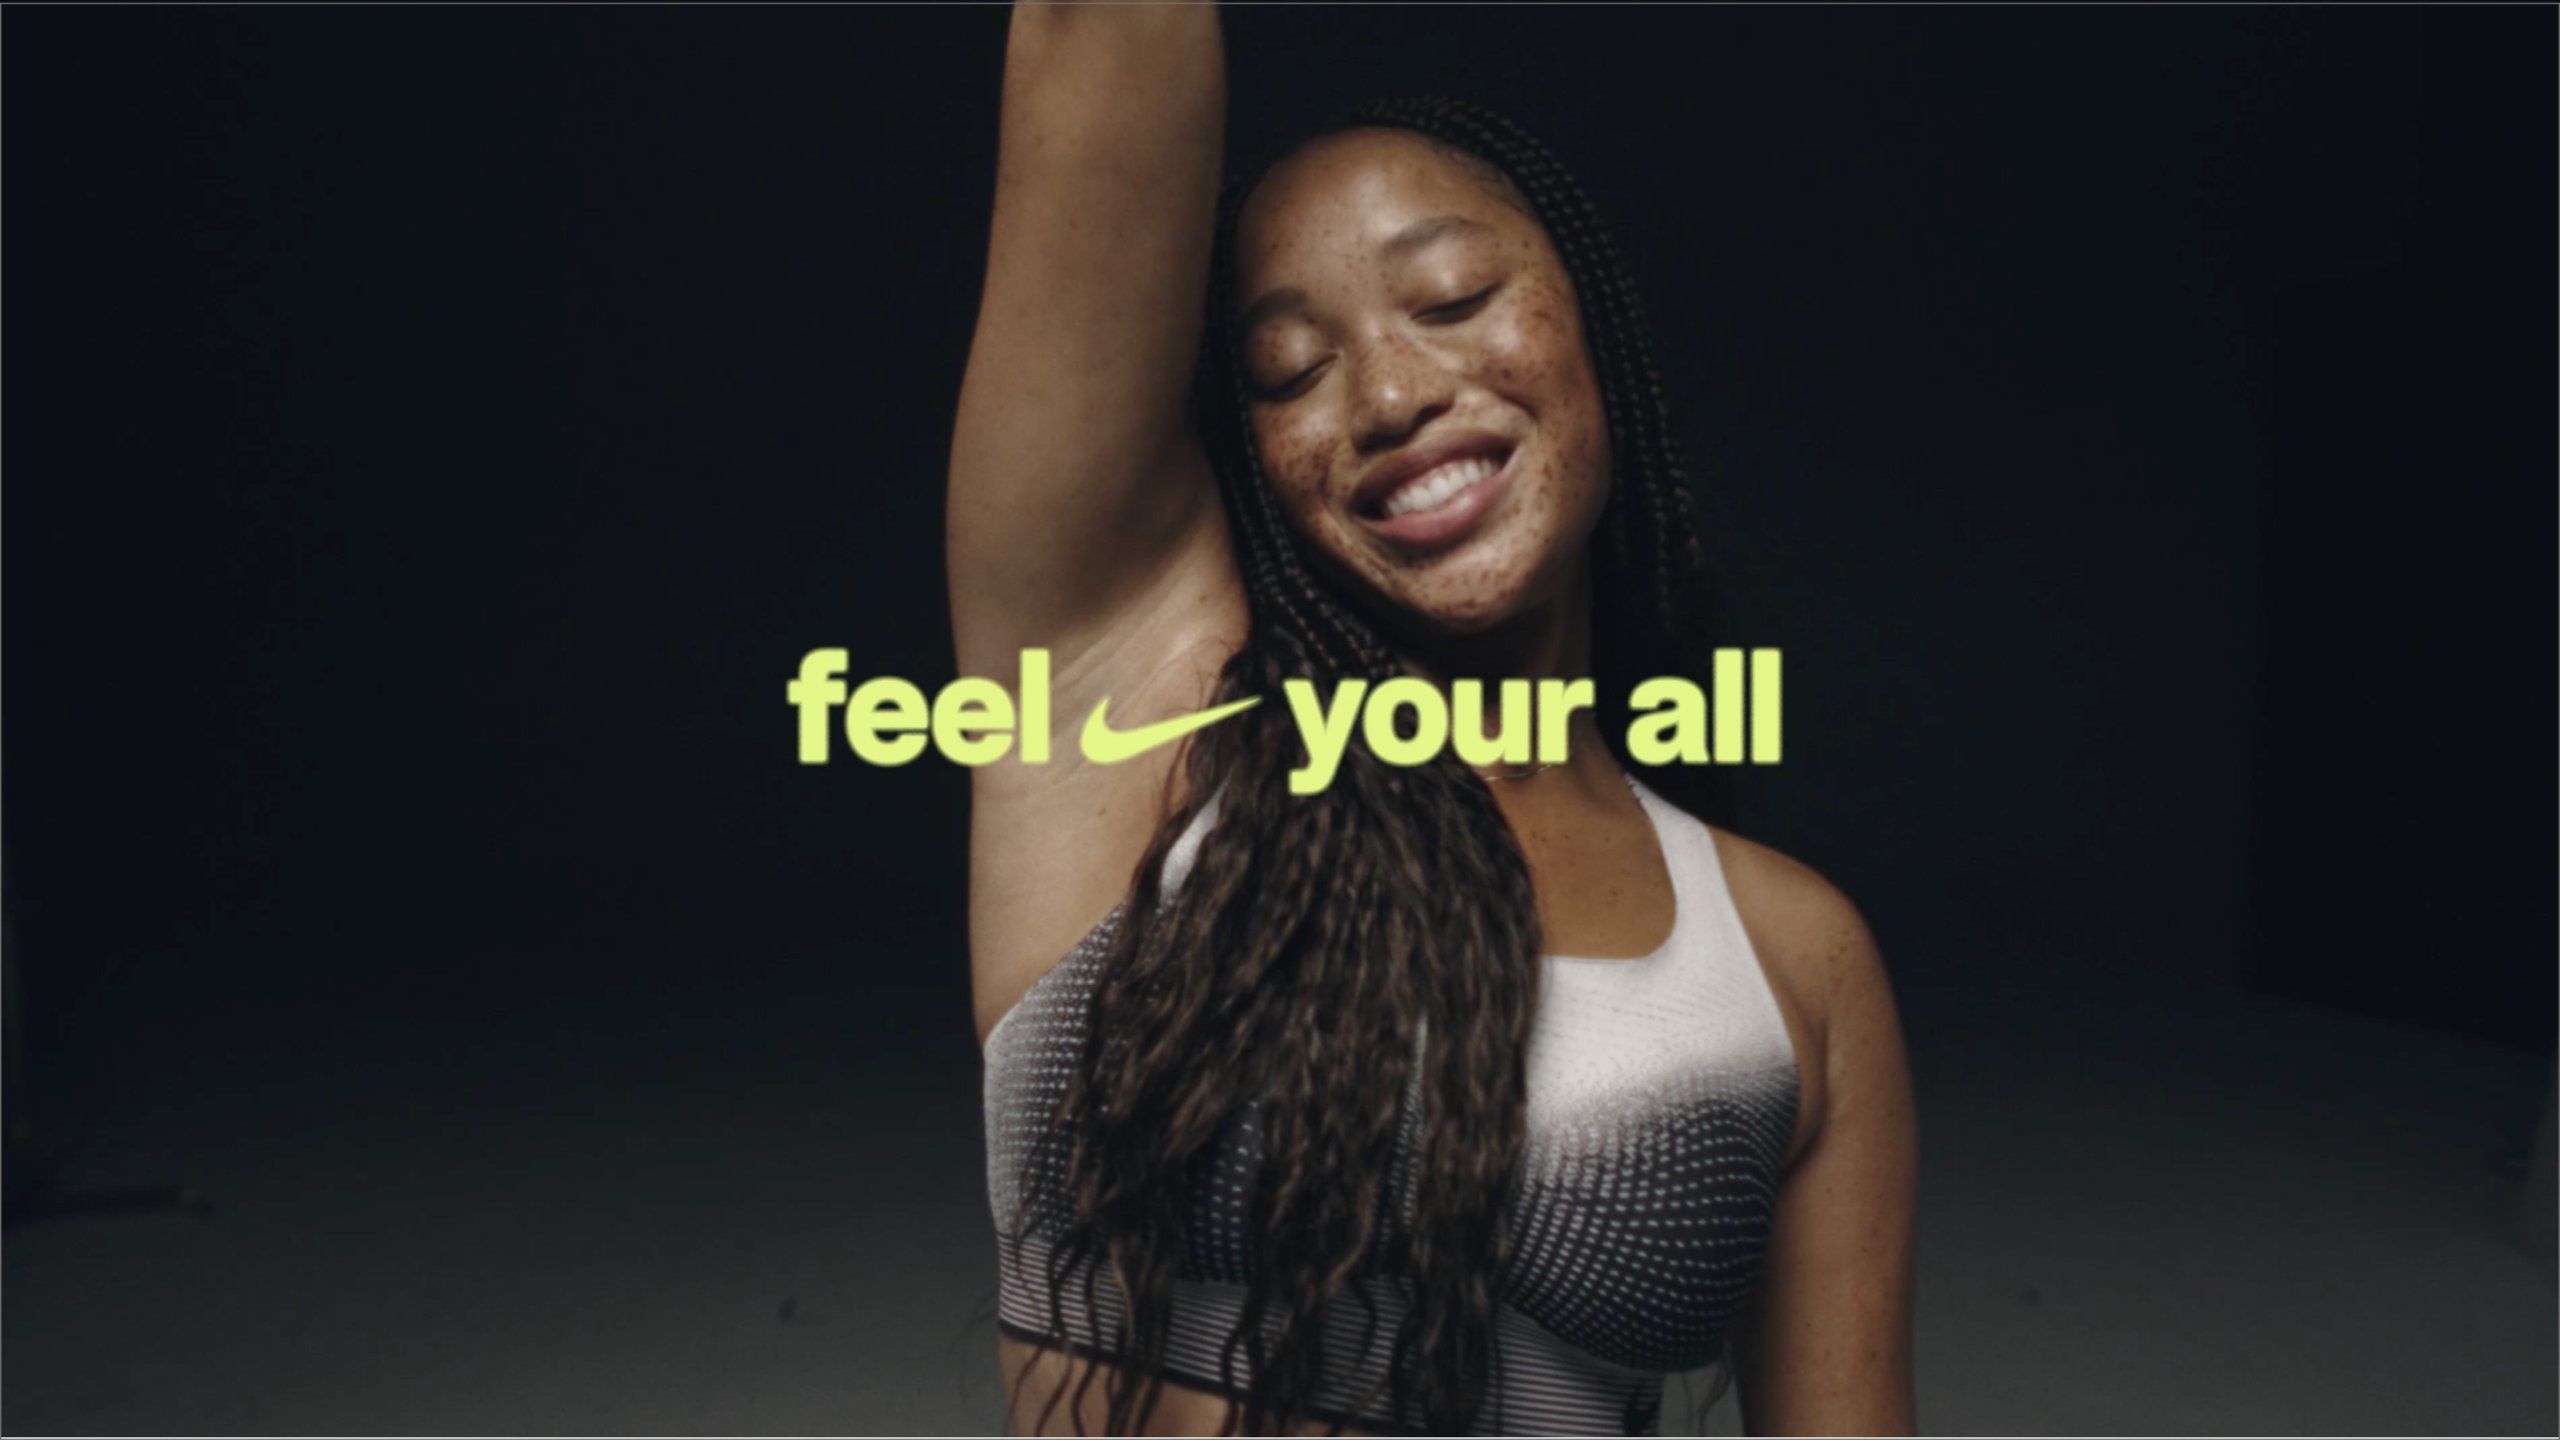 feel your all text with nike swoosh over women athlete smiling with arm raised.